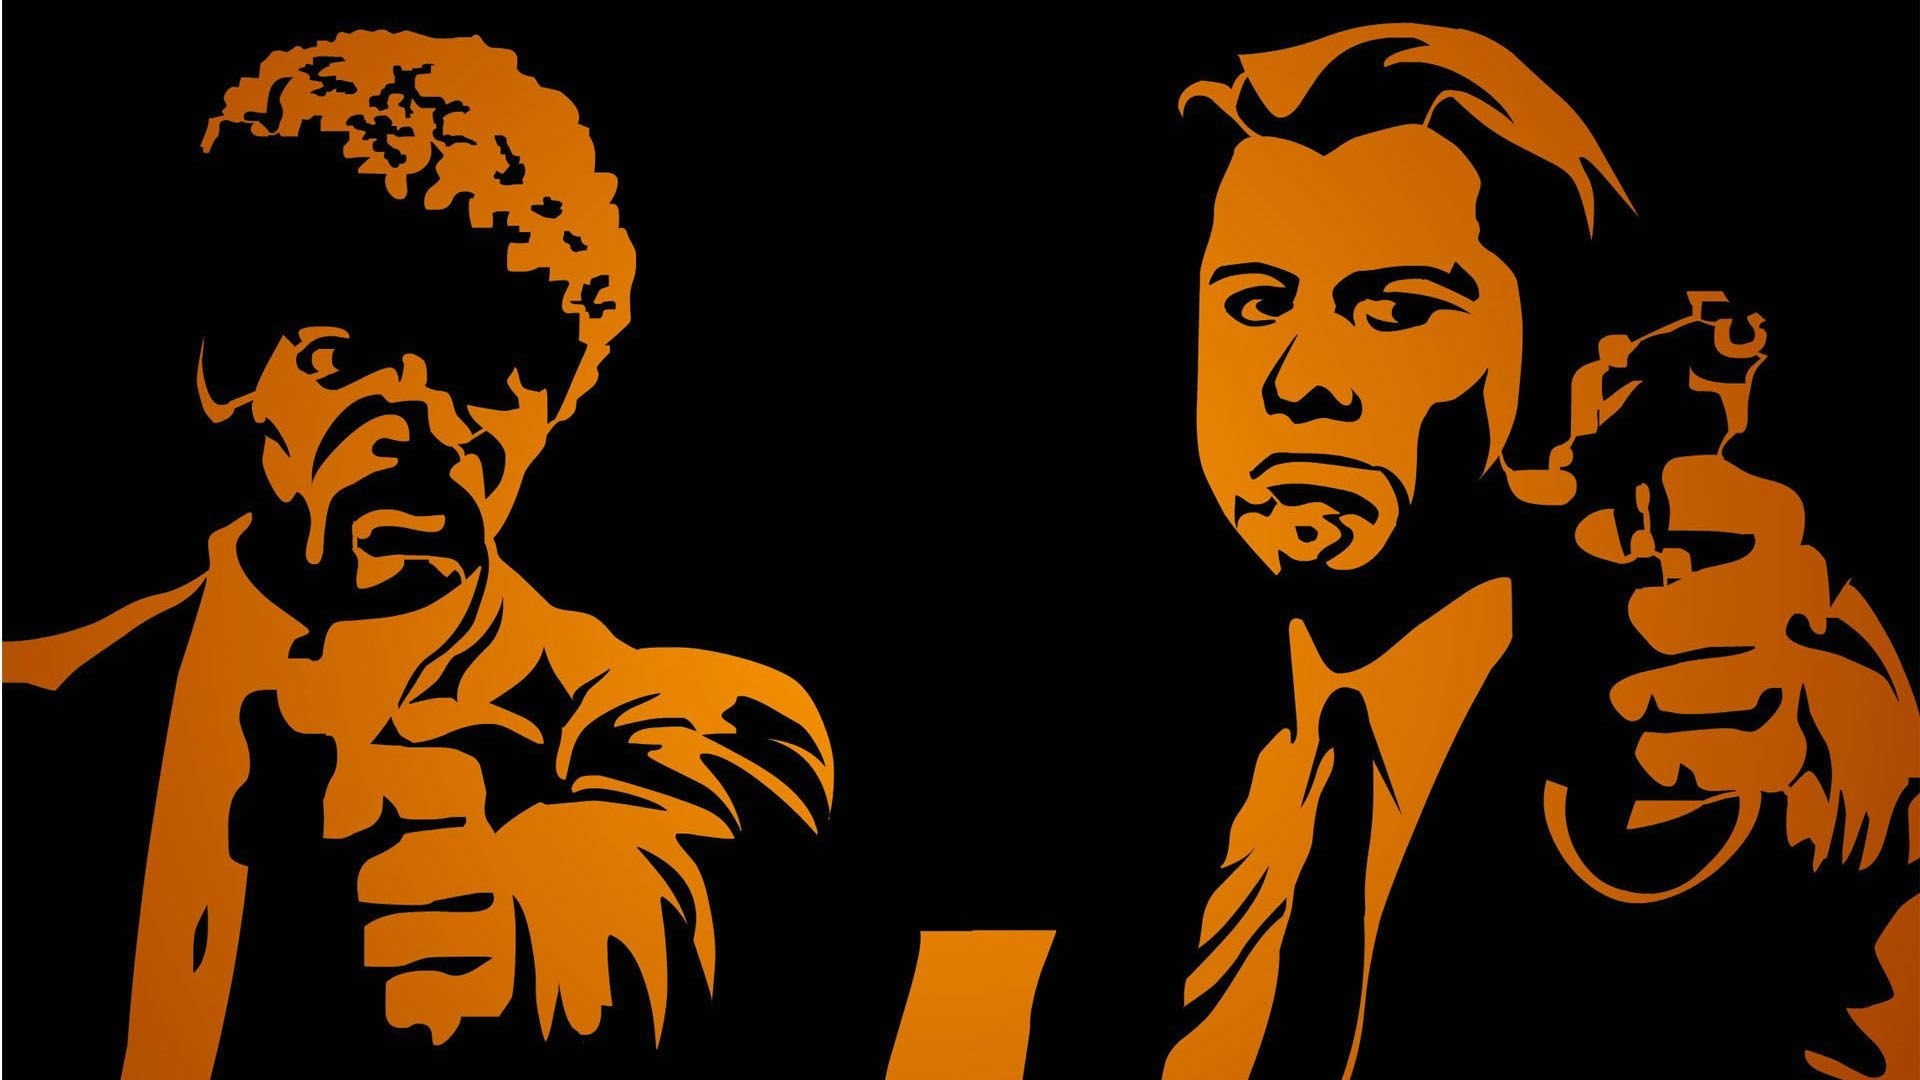 511106 pulp fiction  Wallpaper Collection  Rare Gallery HD Wallpapers